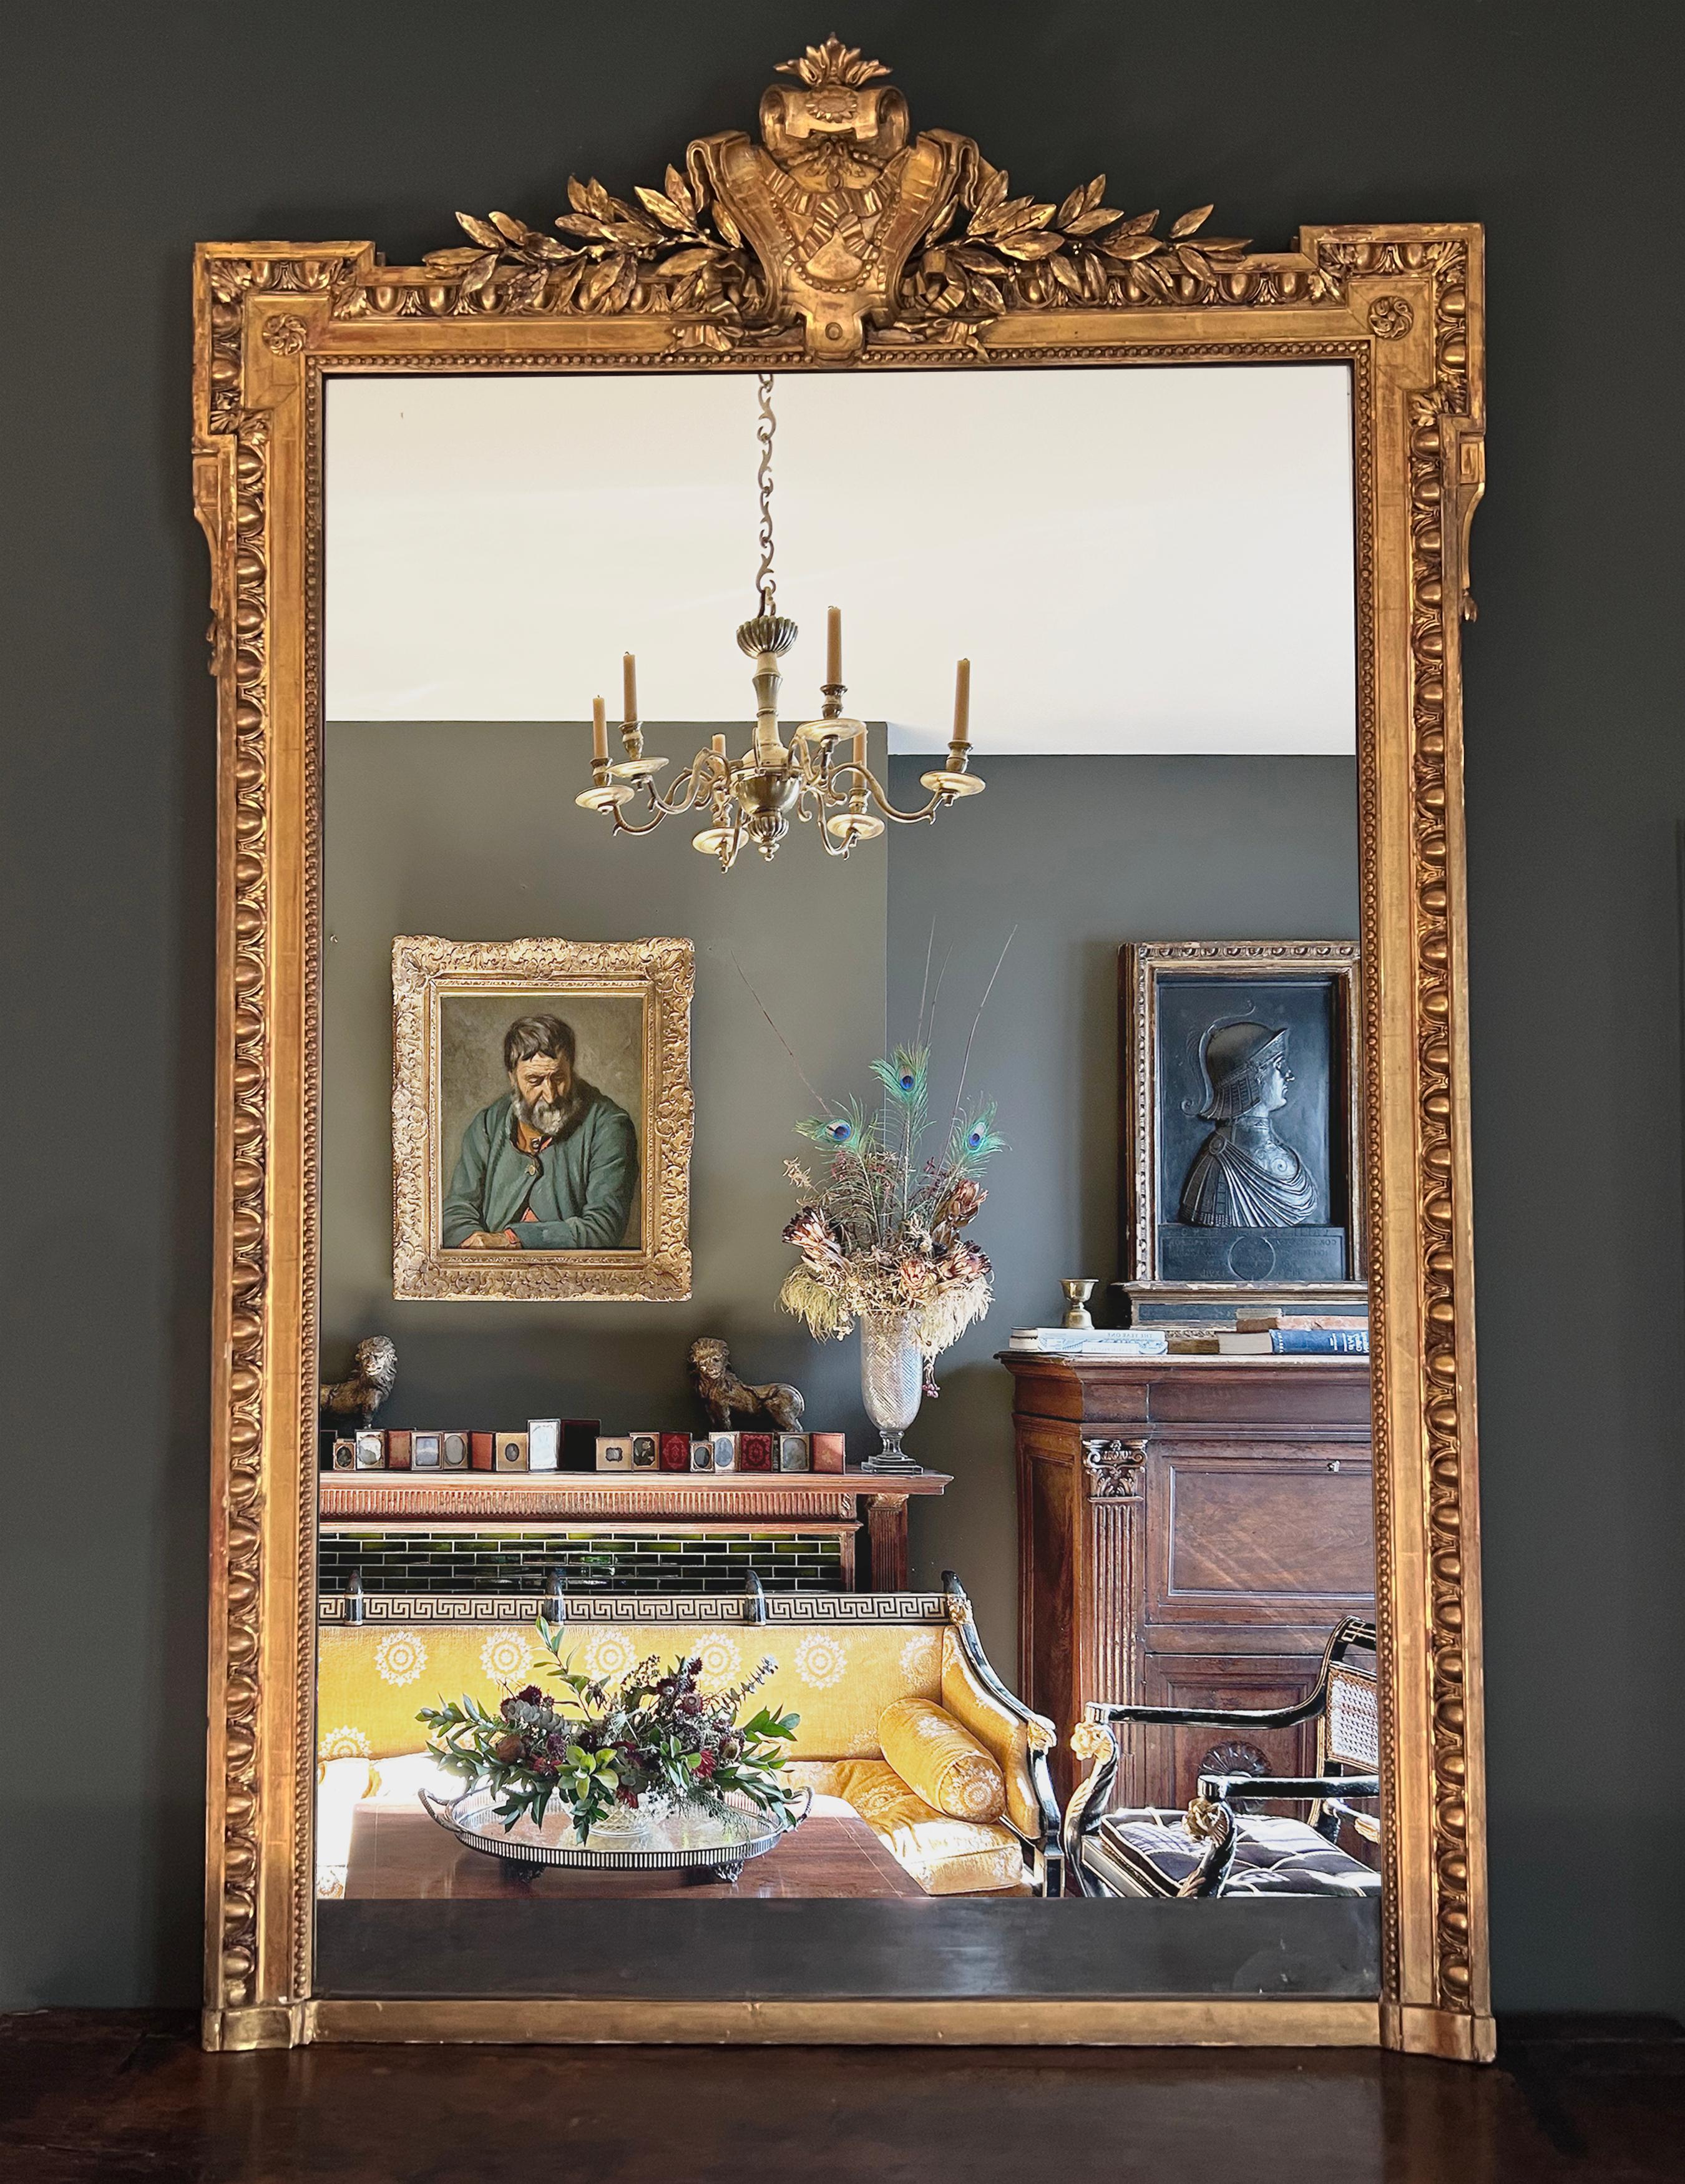 A magnificent and monumental neoclassical pier mirror from the Napoleon III era.  The original Mercury glass plate is bordered by an elegant egg and dart molding with the top of the mirror marked by eared Greek architraves and a laurel